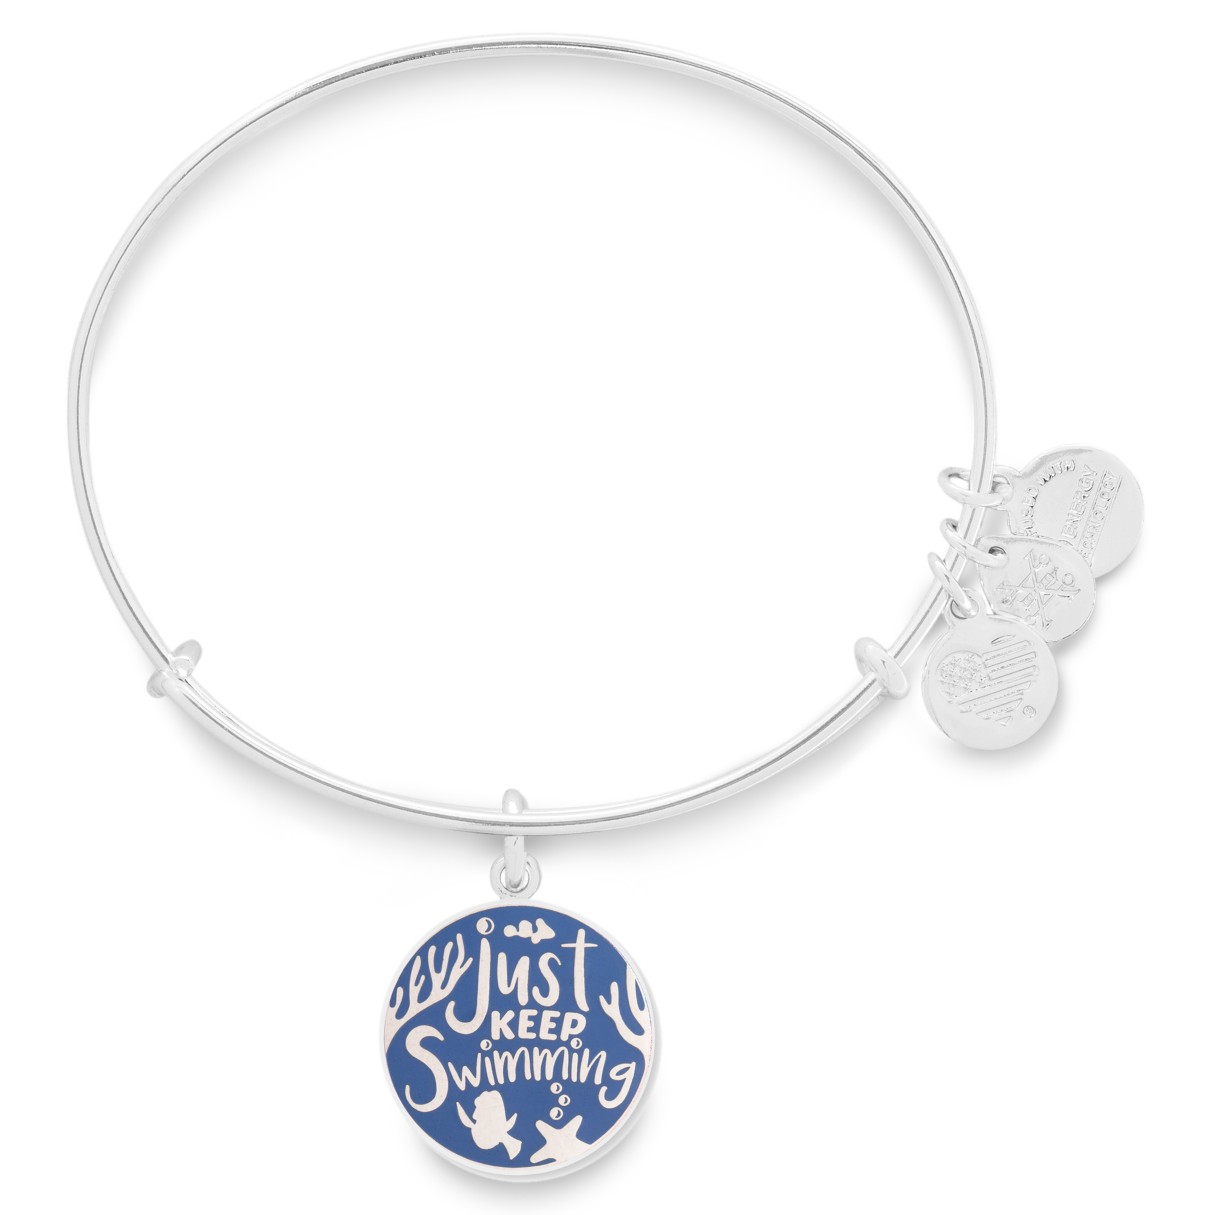 Finding Dory Bangle by Alex and Ani